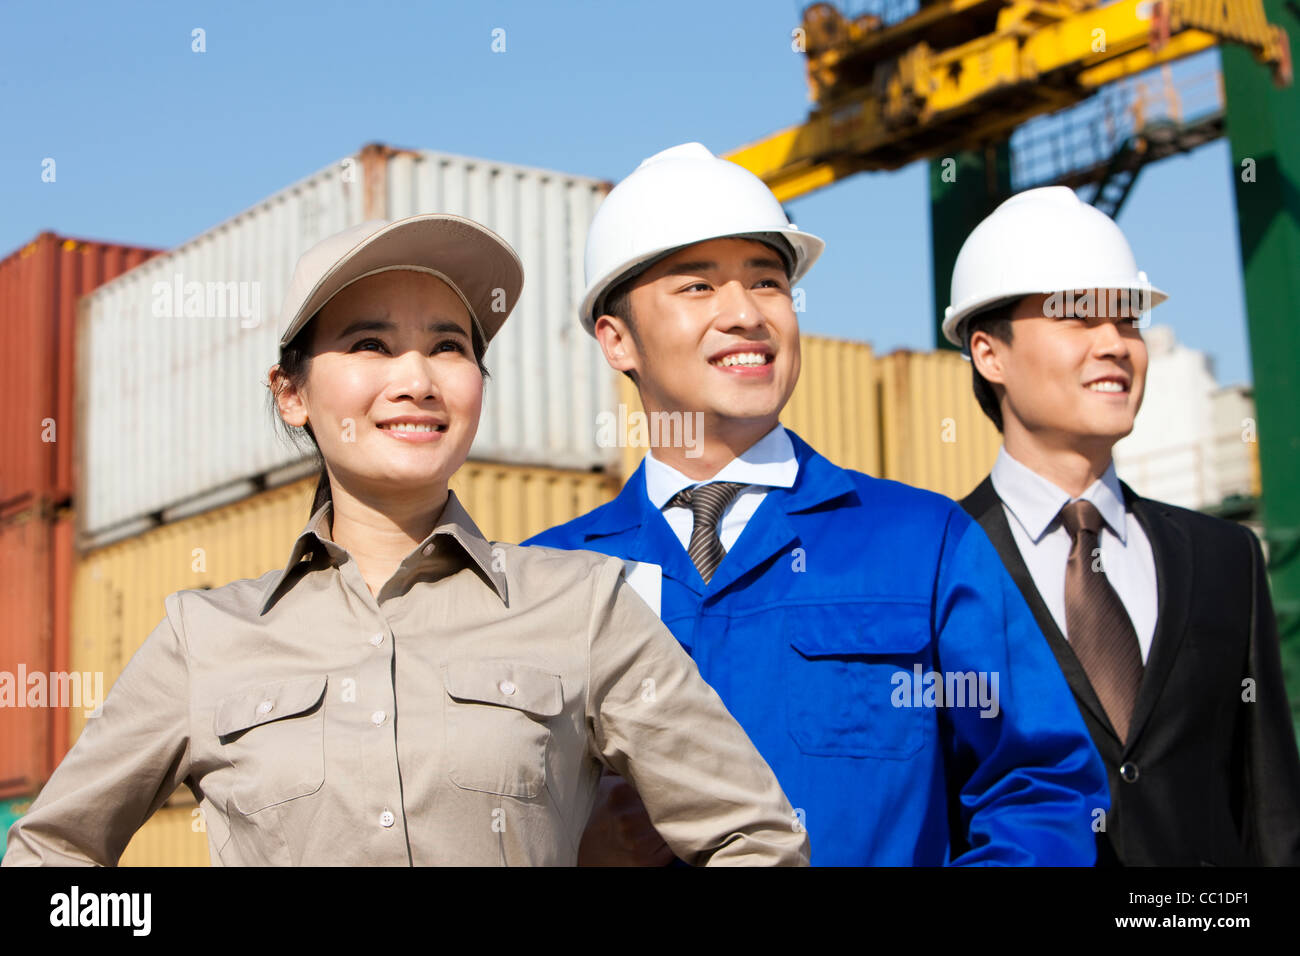 shipping industry professionals in a row Stock Photo